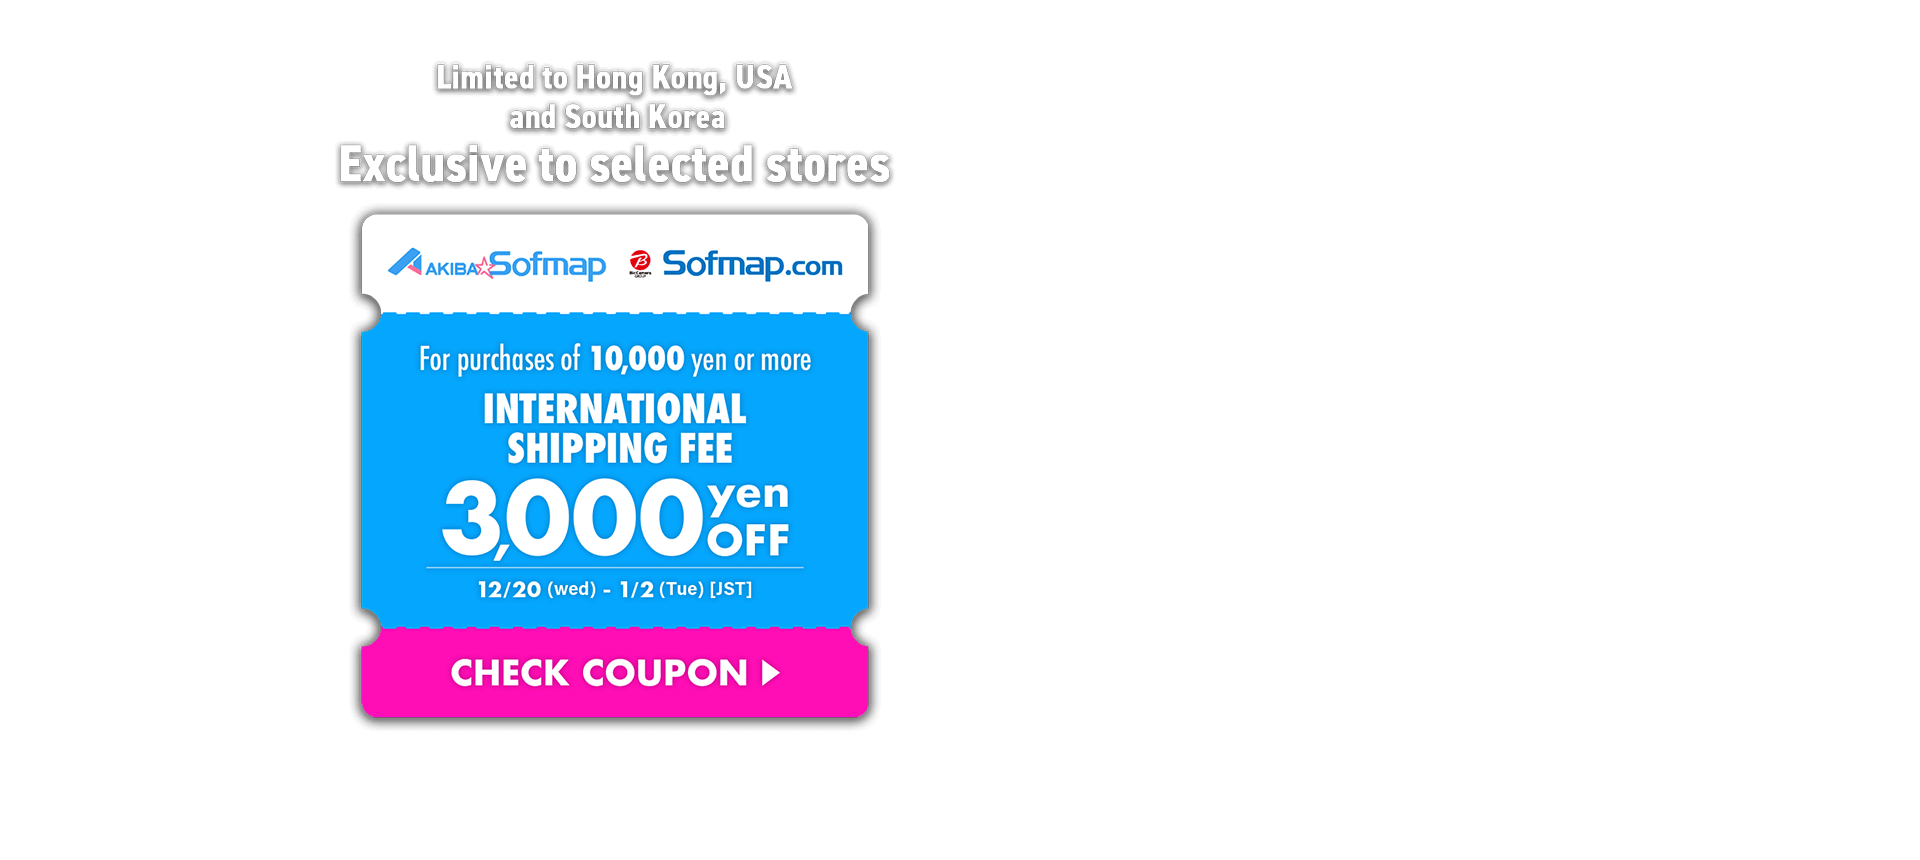 Limited to Hong Kong, USA and South Korea Exclusive to selected stores For purchases of 10,000 yen or more International Shipping Fee 3,000 yen OFF